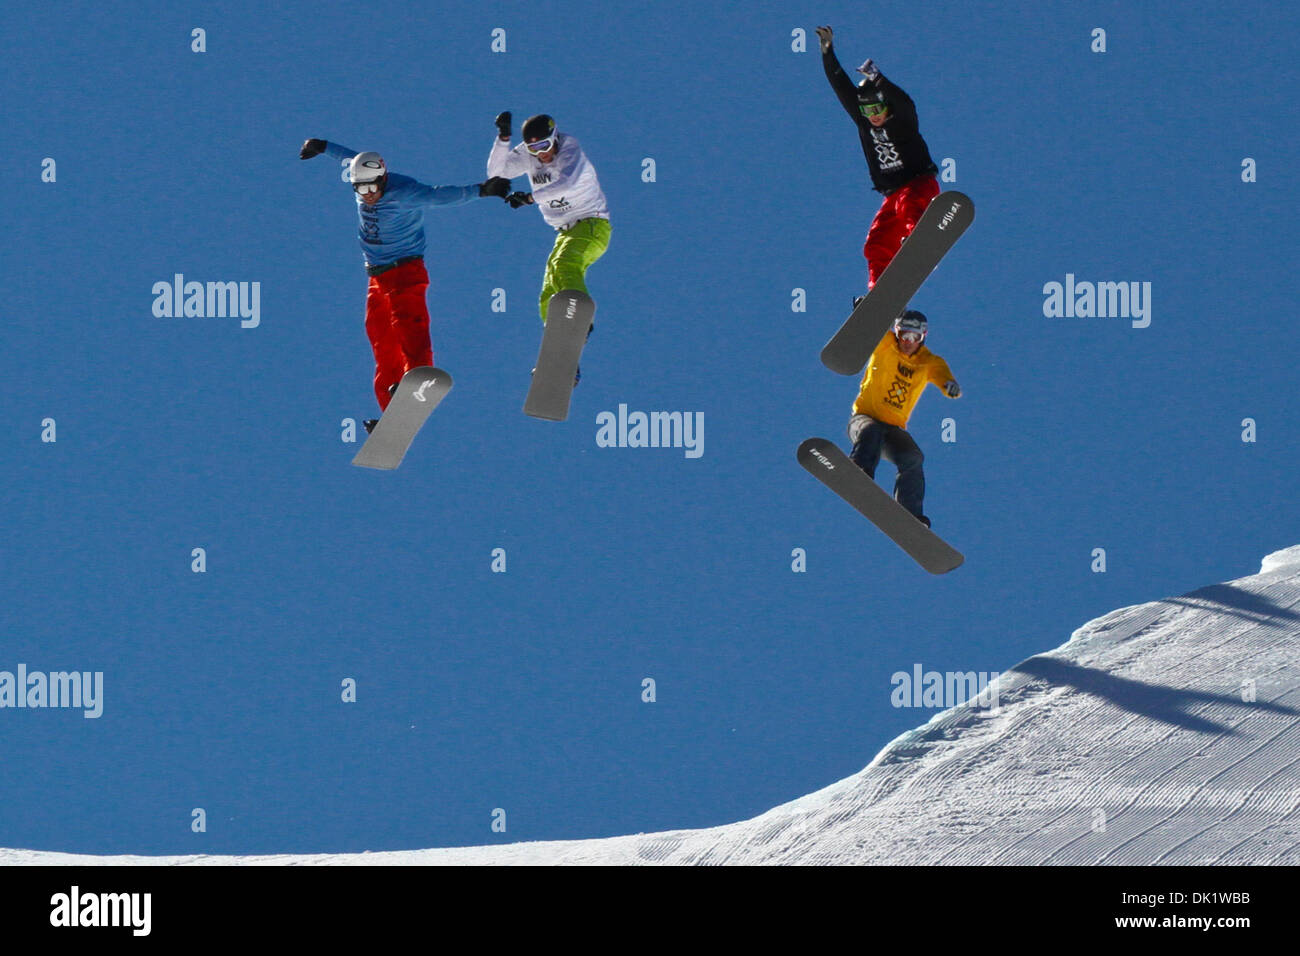 Jan. 29, 2011 - Aspen, Colorado, U.S. - NICK BAUMGARTNER (L) leads the pack over the last jump at the Winter X-Games Snowboarder X Finals. Baumgartner, riding with a broken collarbone, brought home the gold. (Credit Image: © Rustin Gudim/ZUMAPRESS.com) Stock Photo